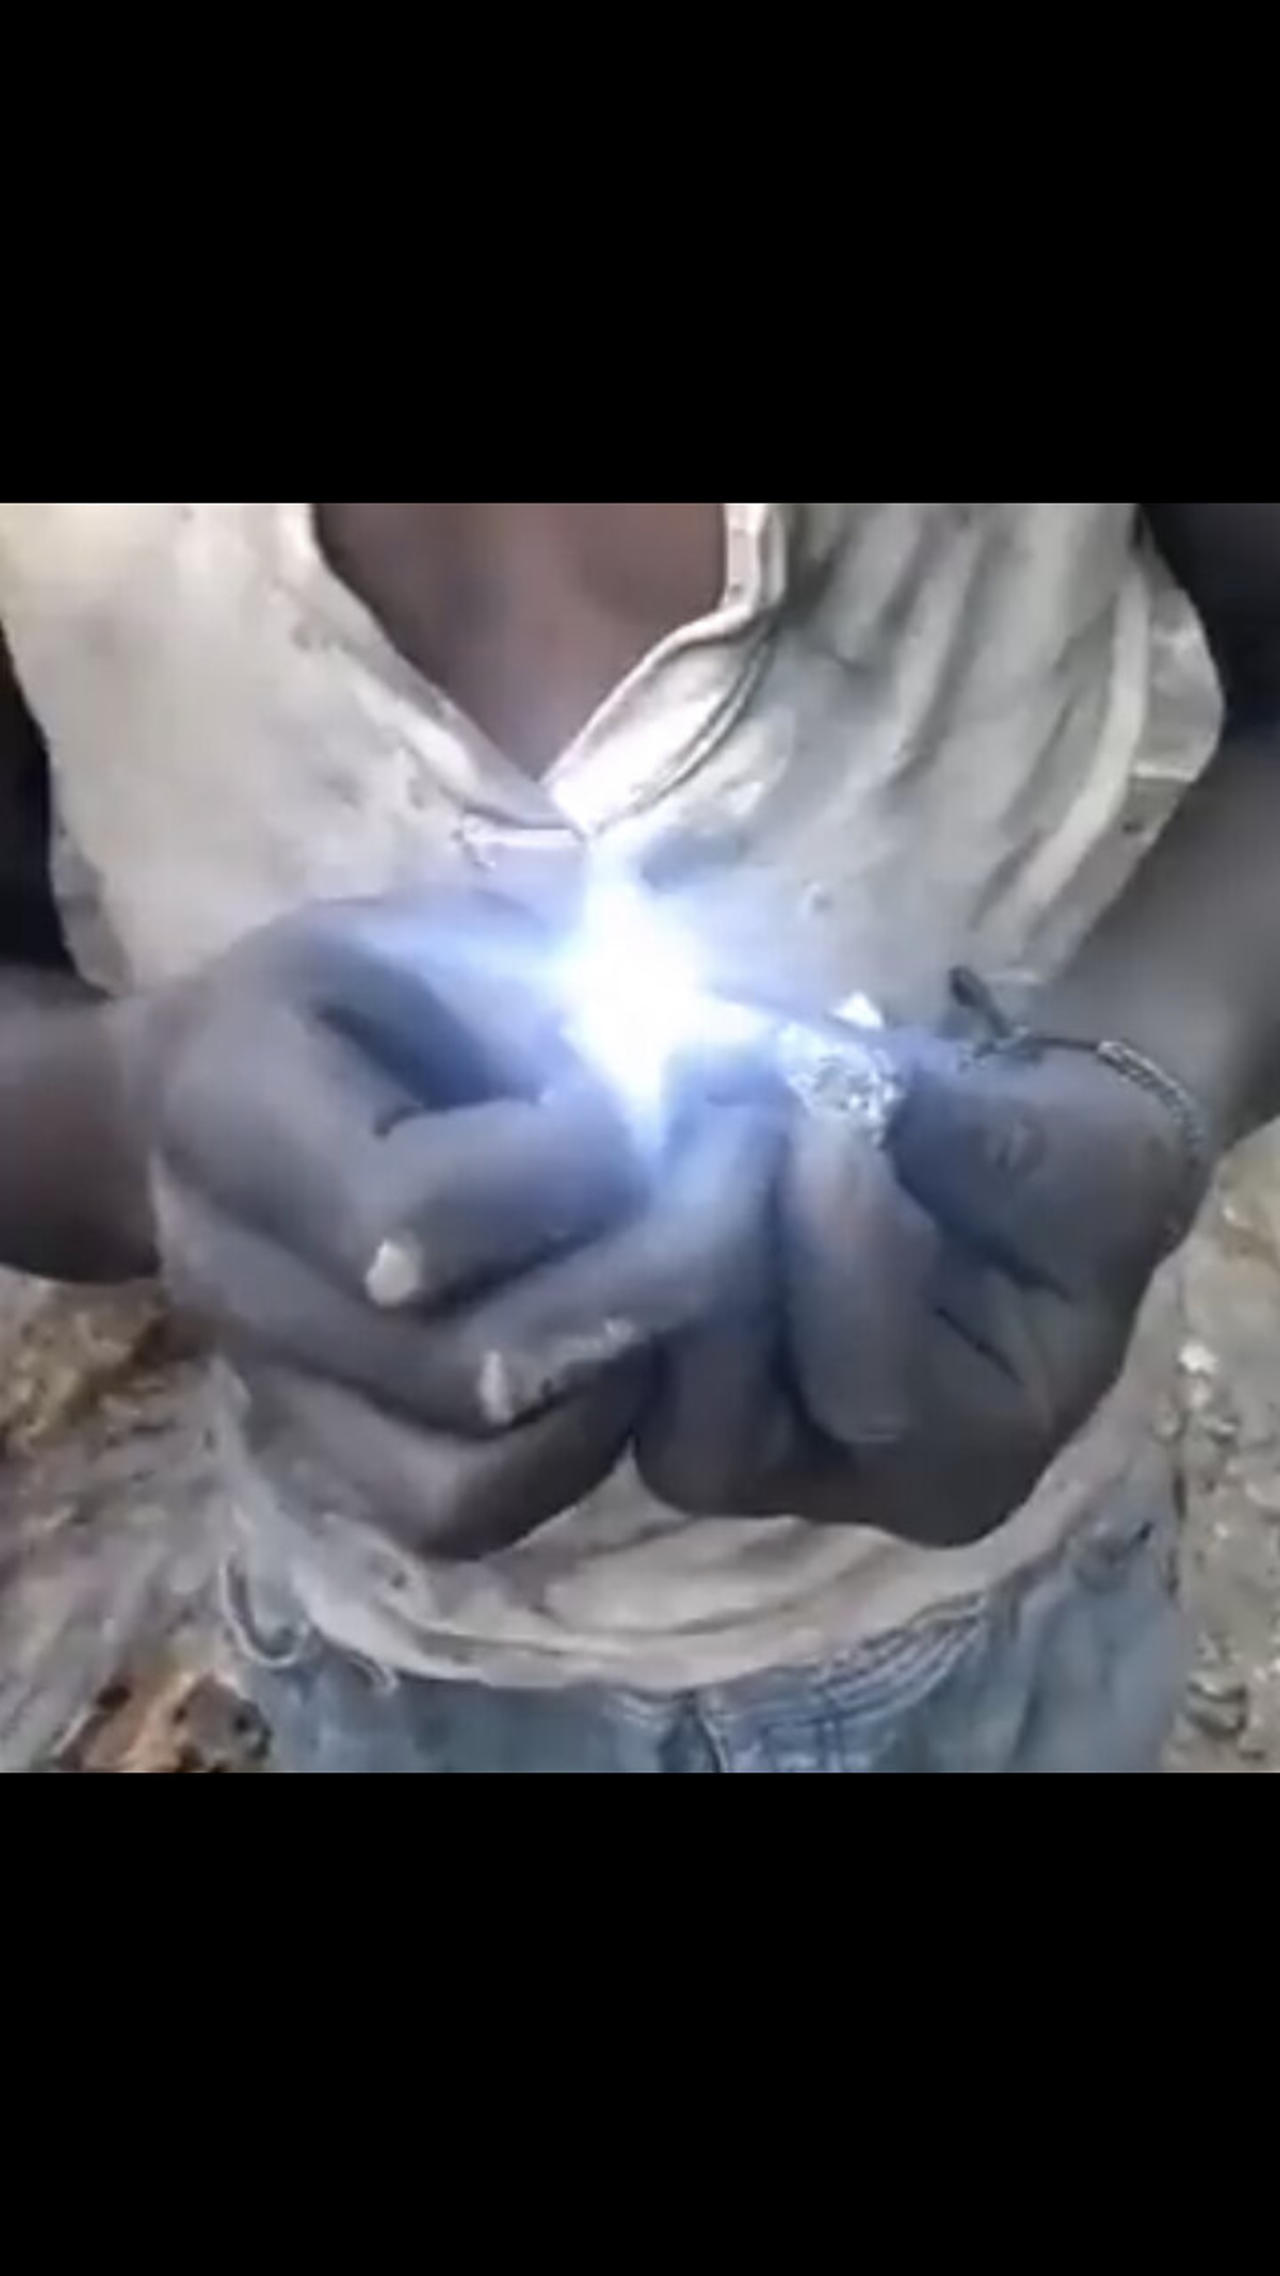 Stones discovered in Congo in Africa that generate electricity by themselves.